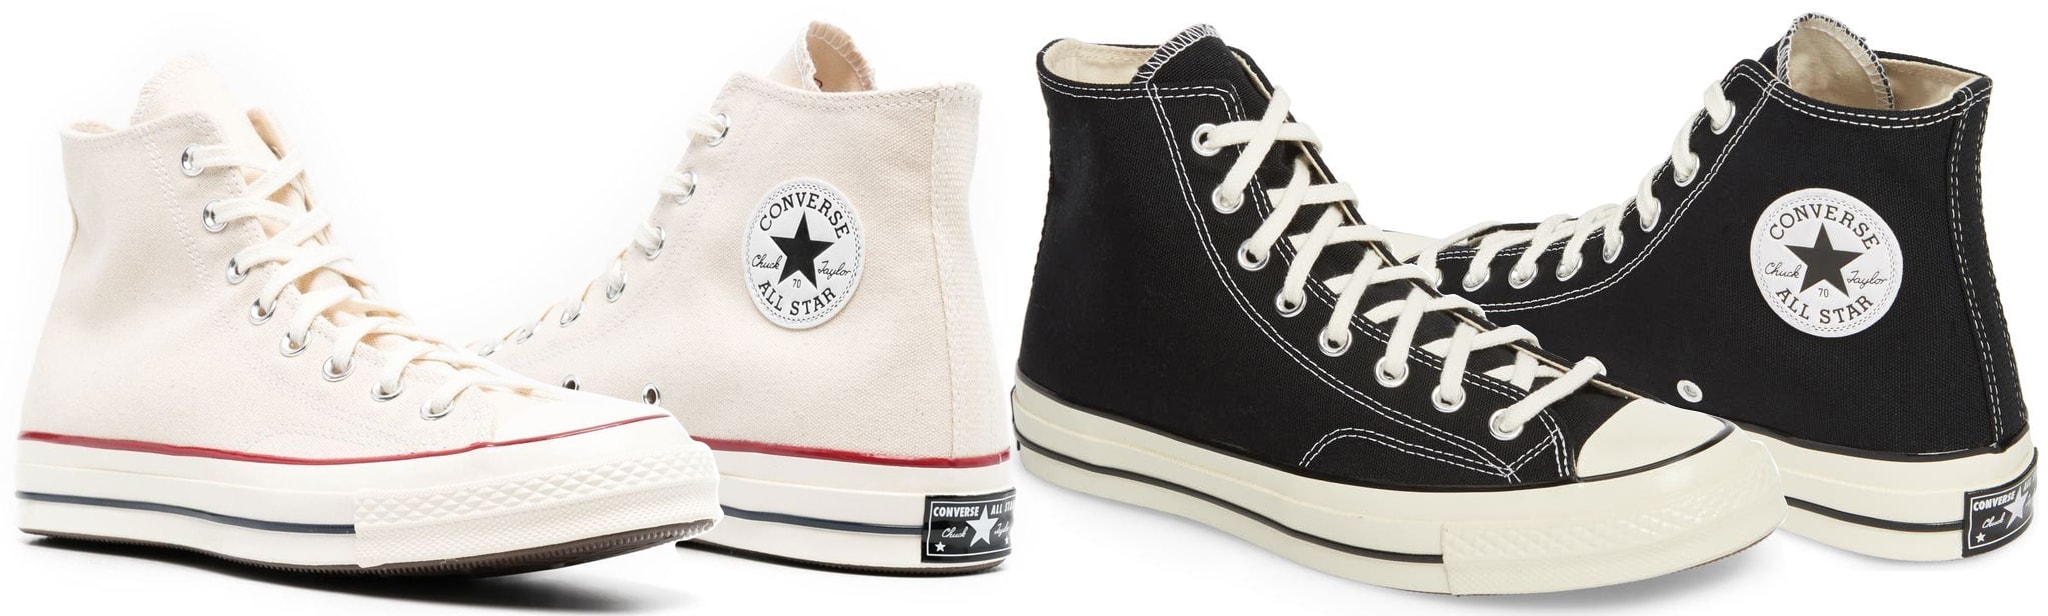 While the exact origin of high-top sneakers is unclear, Converse is widely credited with popularizing the style in the early 20th century